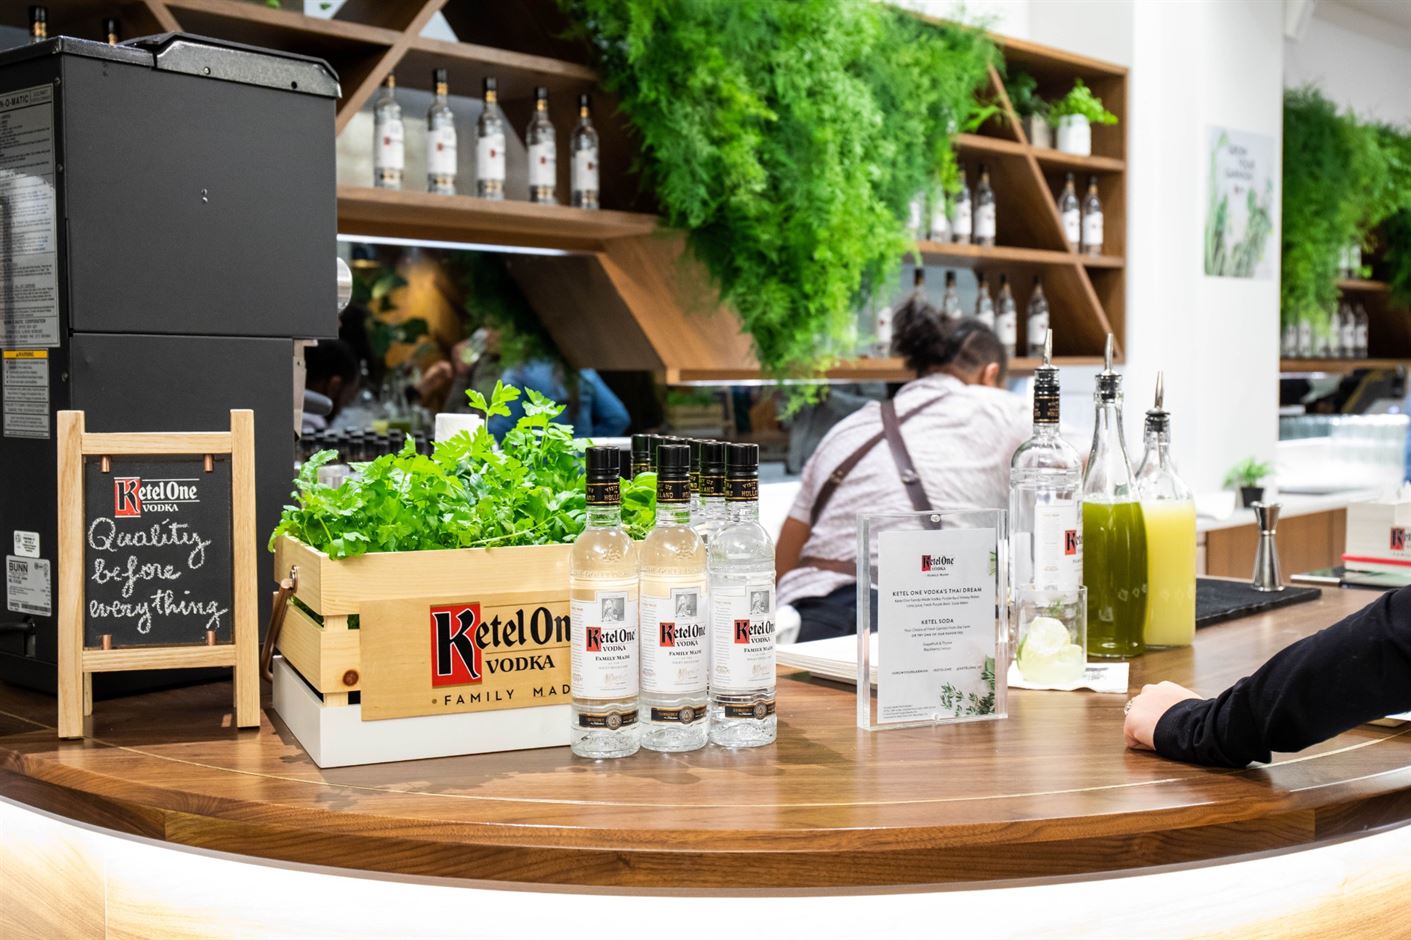 ketelone vodka brand activation event at Blender Workspace private event space NYC